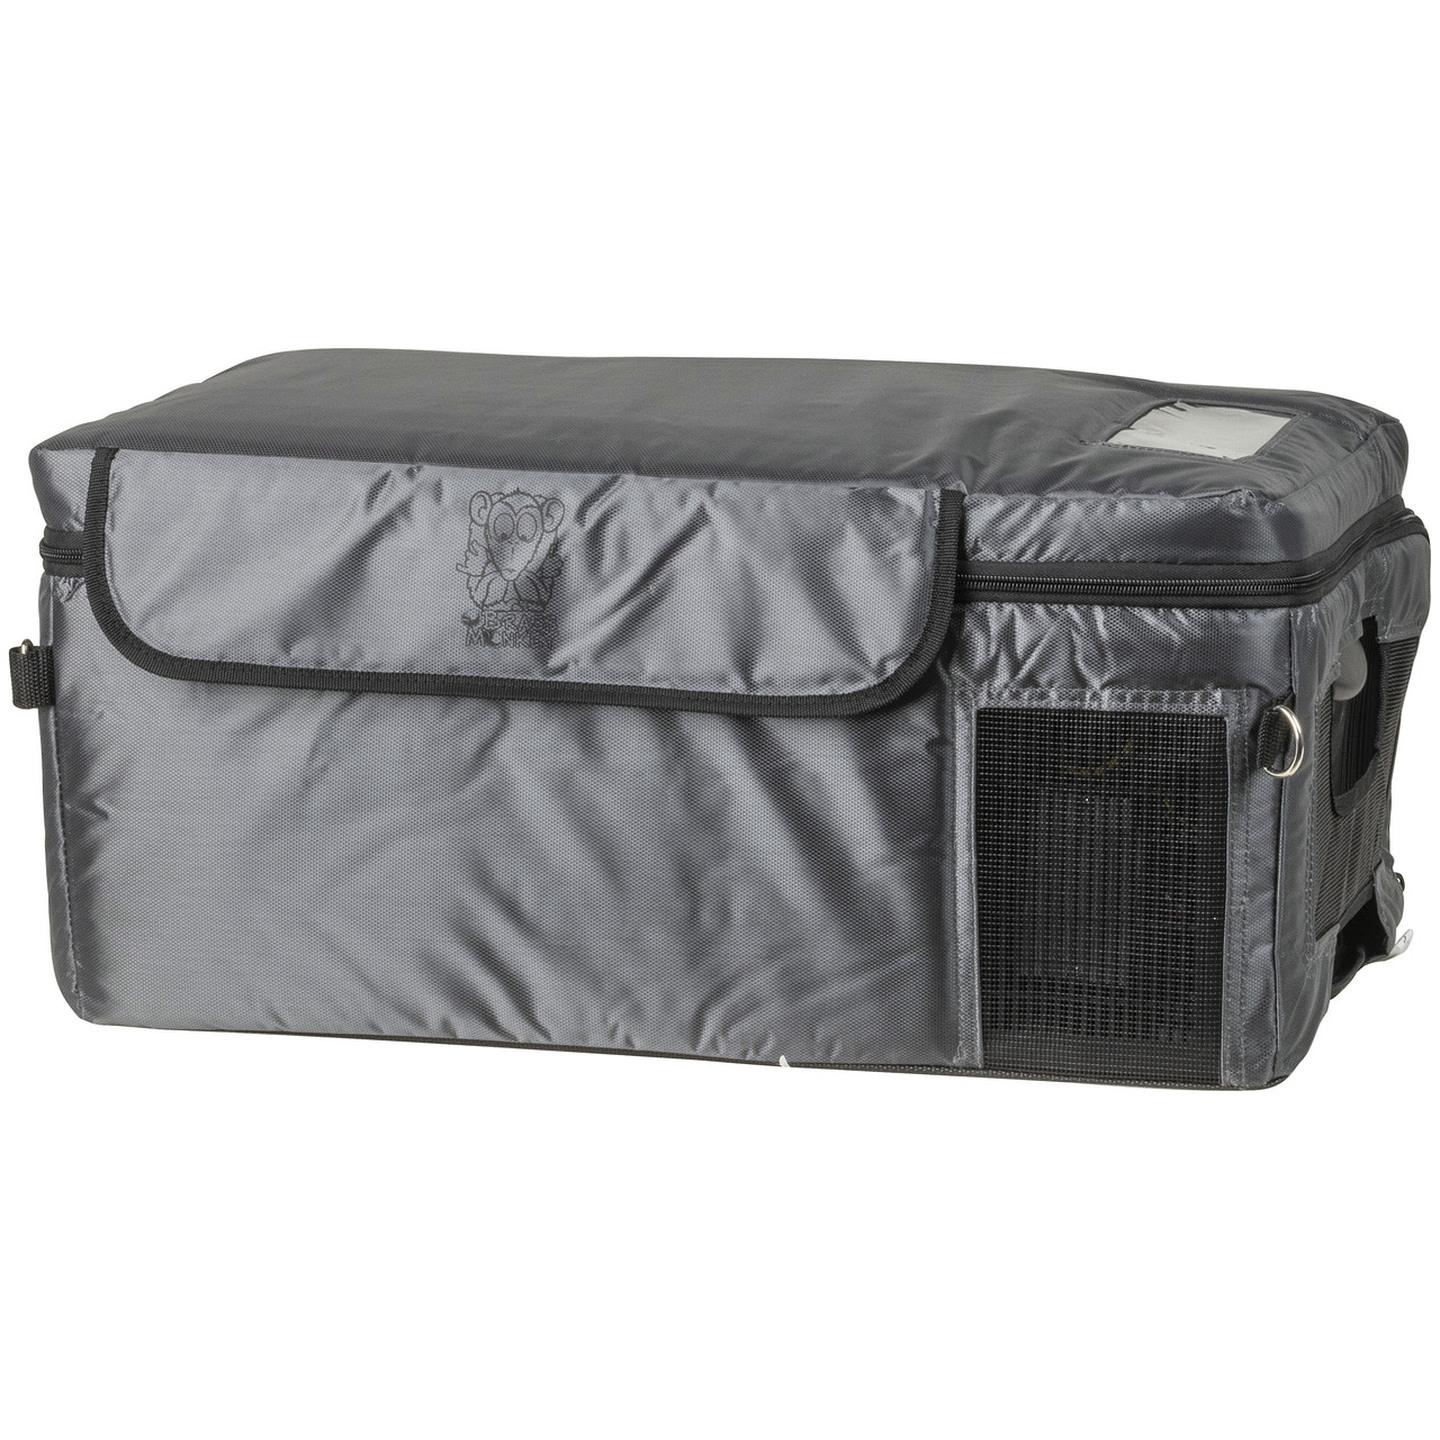 Grey Insulated Cover for 15L Brass Monkey Portable Fridge Freezer with Handle